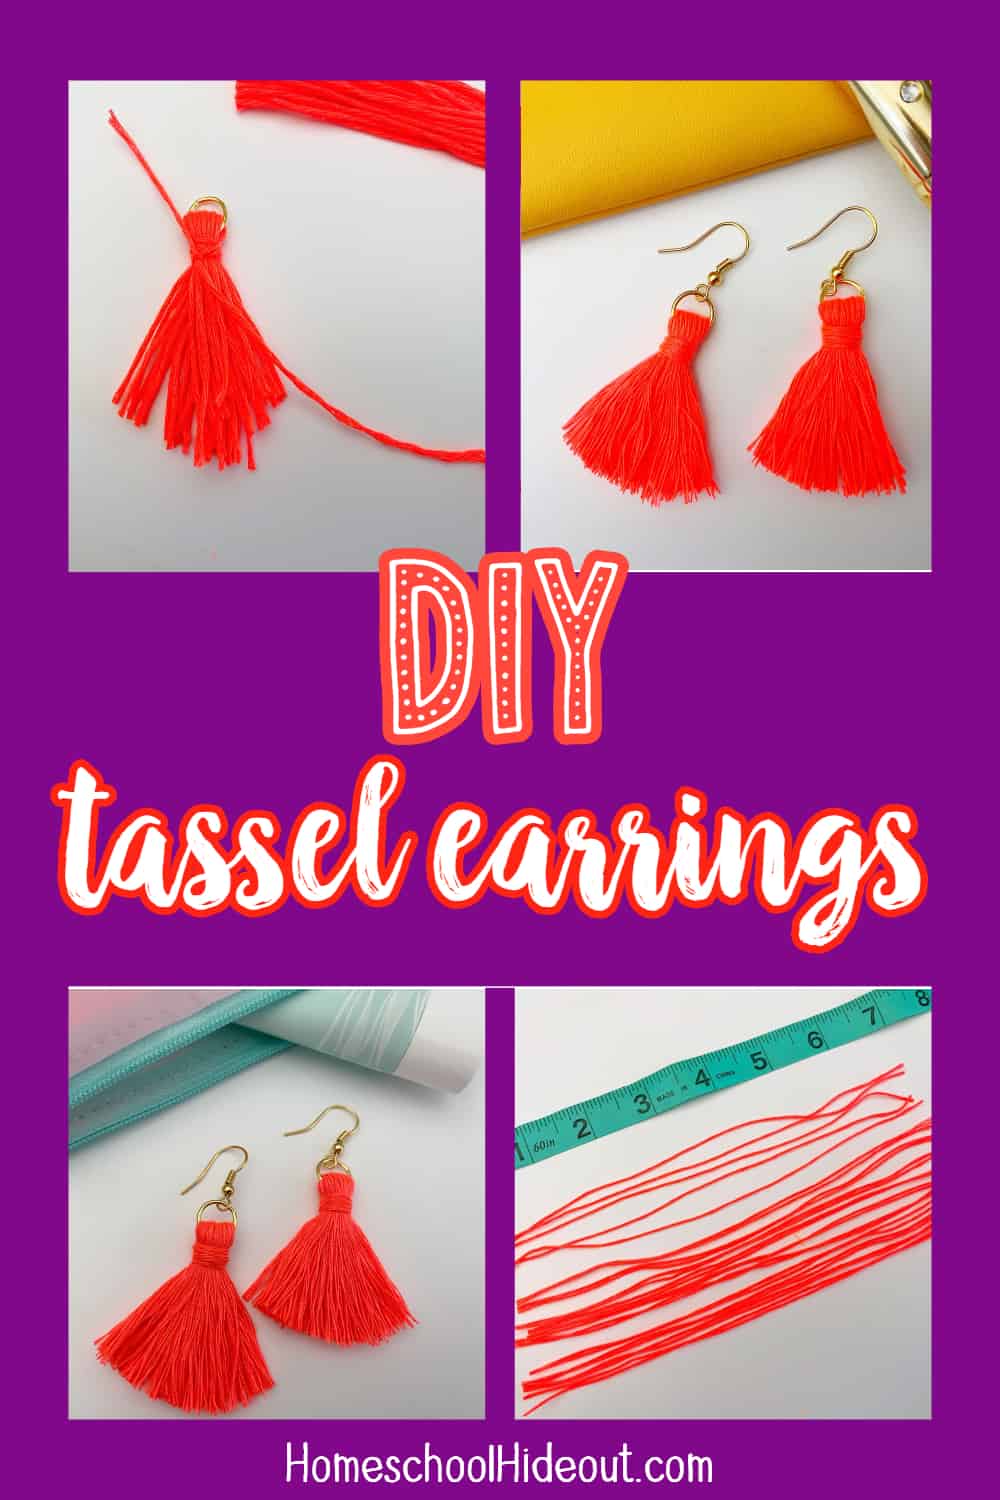 Make your own perfect crystal-studded ombre tassel earrings | CBC Life